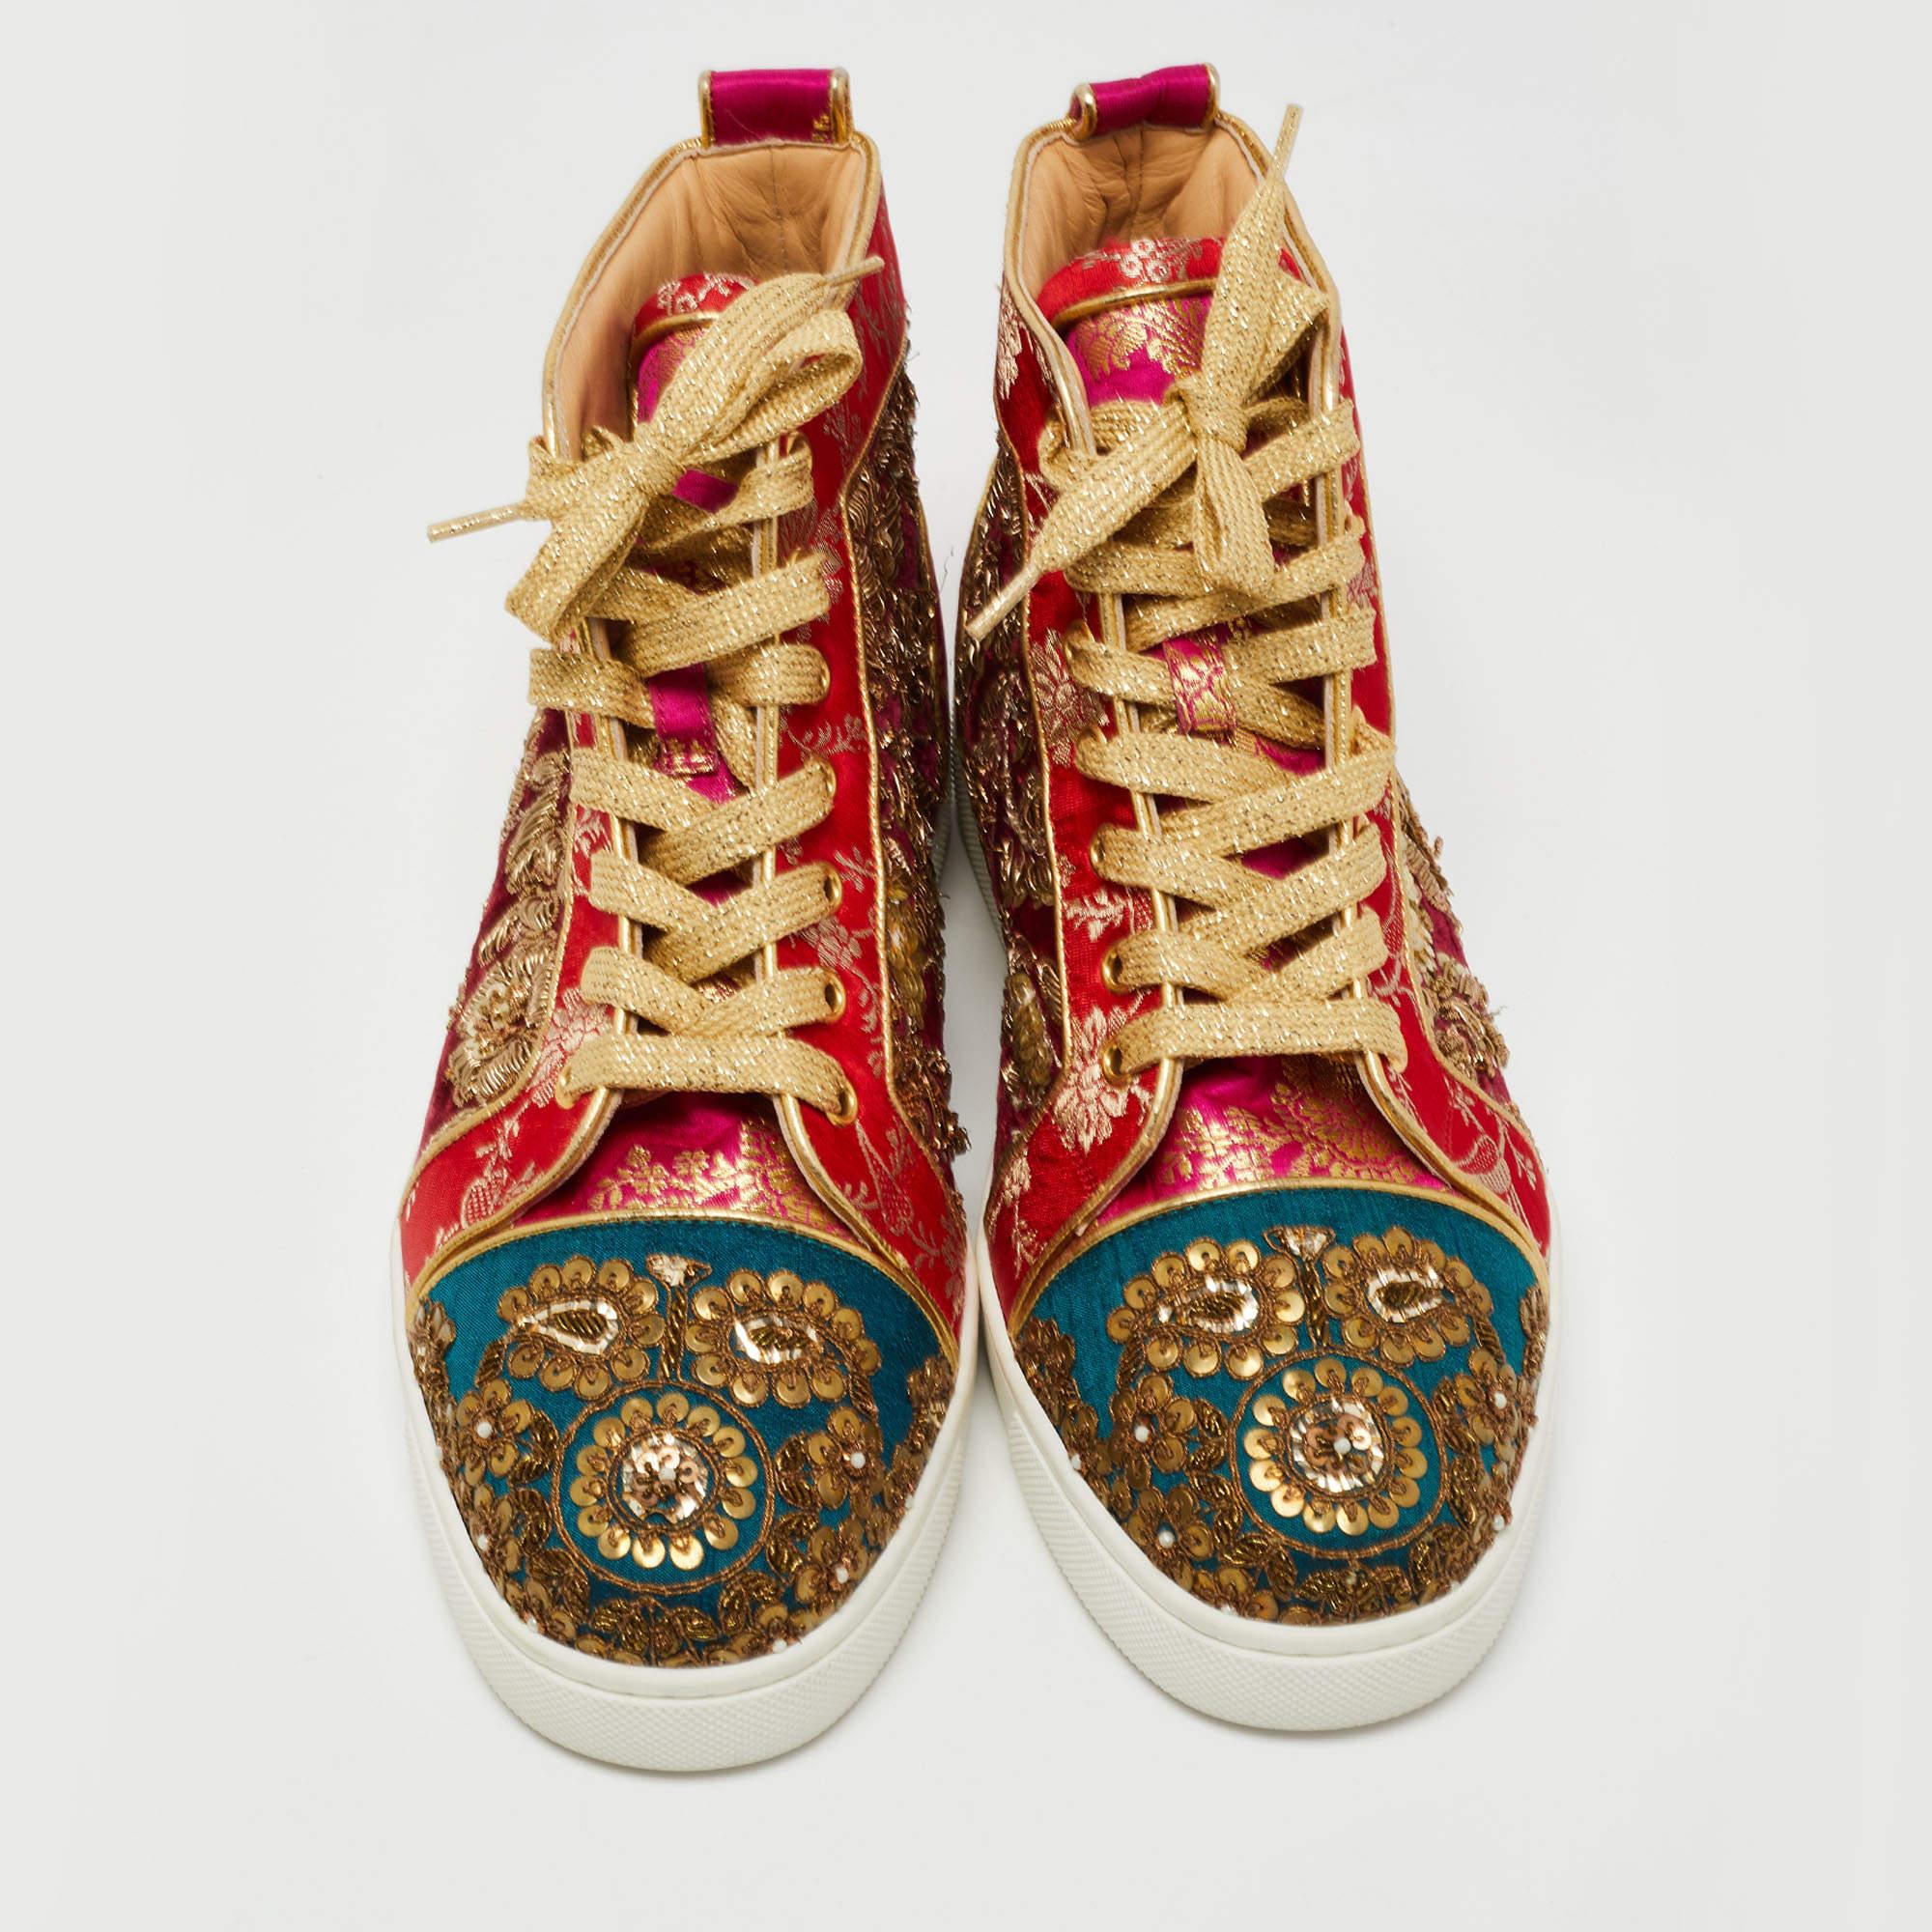 French designer shoemaker Christian Louboutin and India's most-loved couturier Sabyasachi Mukherjee came together for an exclusive capsule collection to create the most stunning footwear. Here is a high-top sneaker from the same line-up. It has been